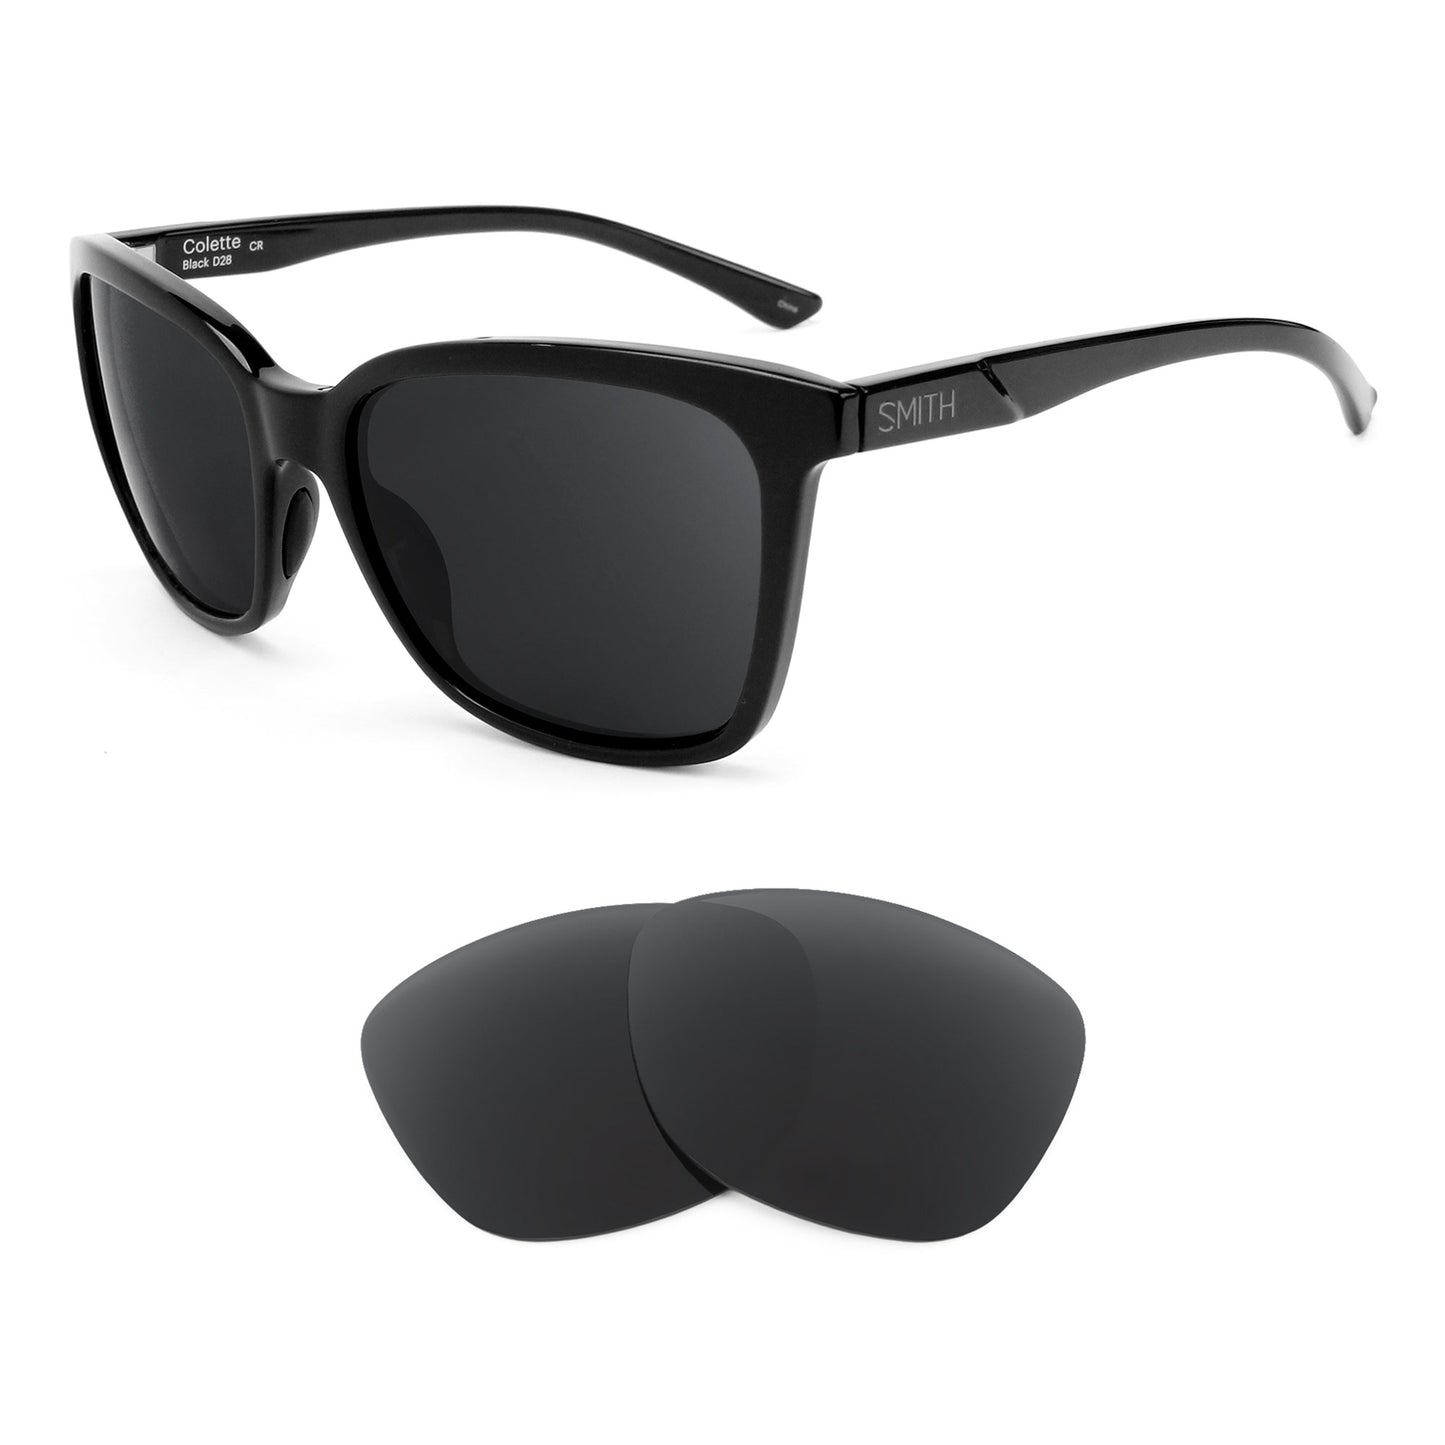 Smith Colette sunglasses with replacement lenses